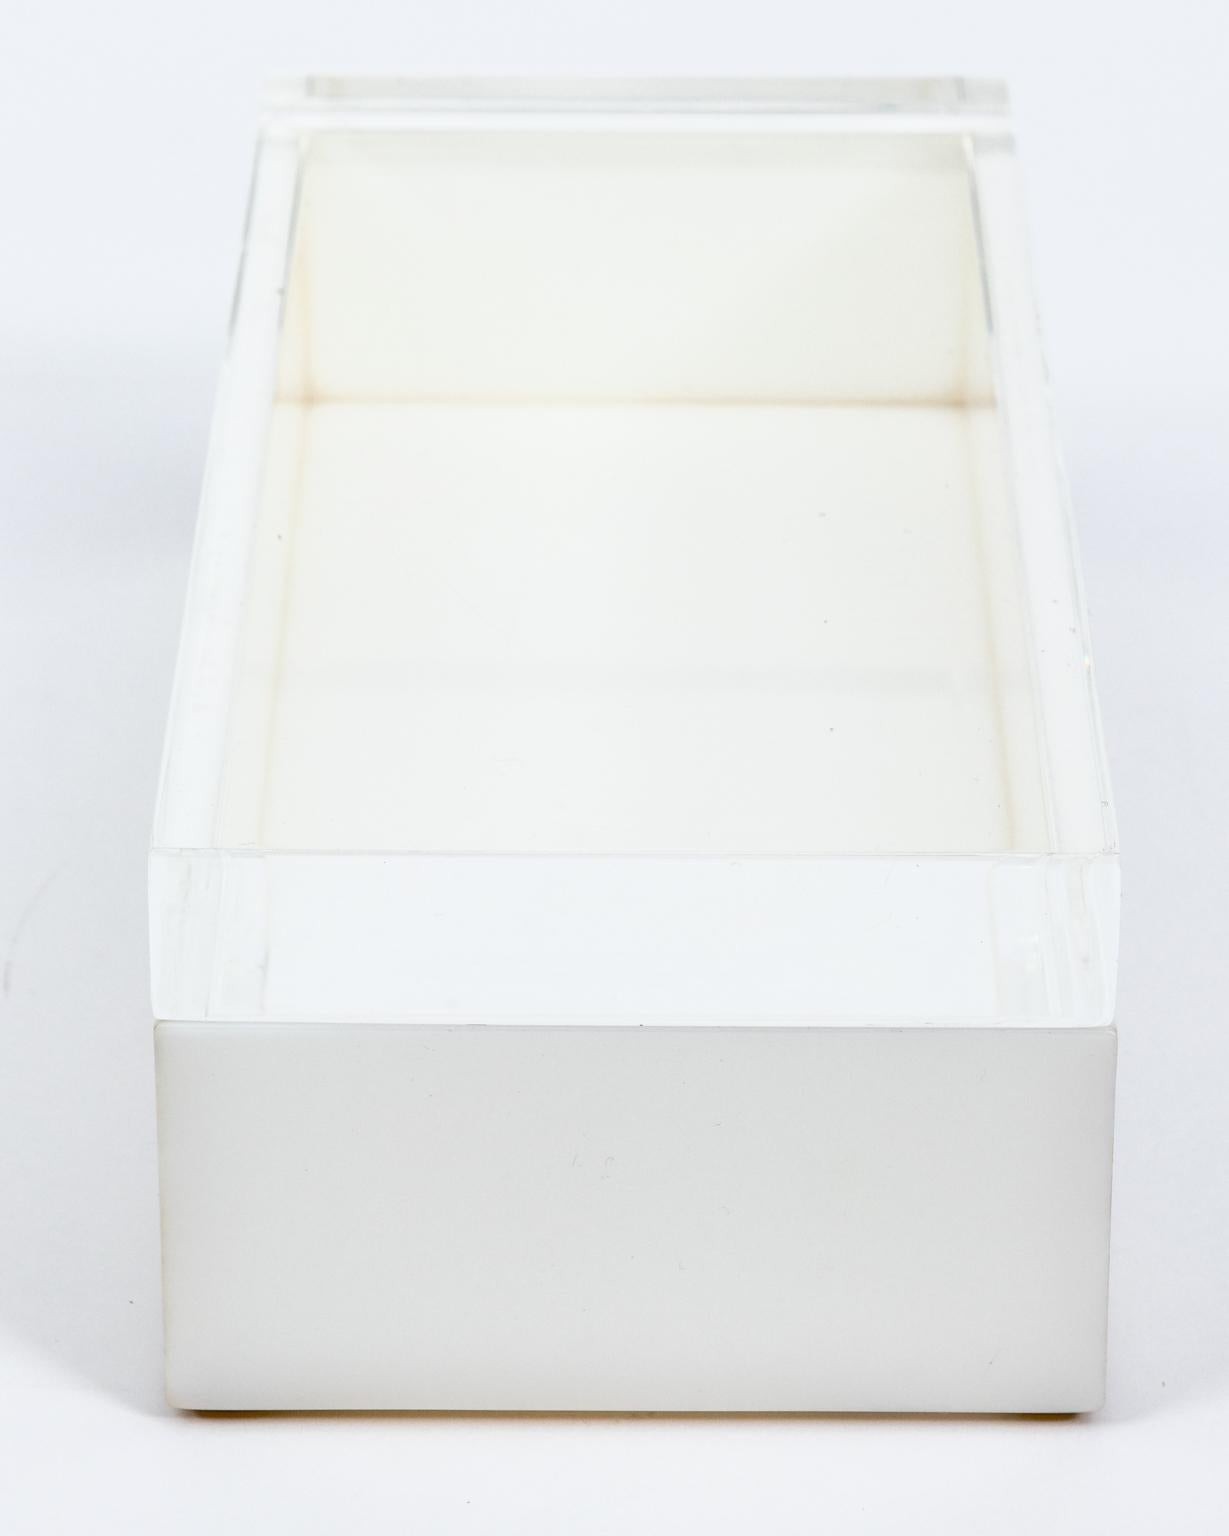 Circa 1970s rectangular Alessandro Albrizzi mid-century signed Lucite box that is clear on top and white on bottom in two part box. Made in Italy. Please note of wear consistent with age including scratches throughout.